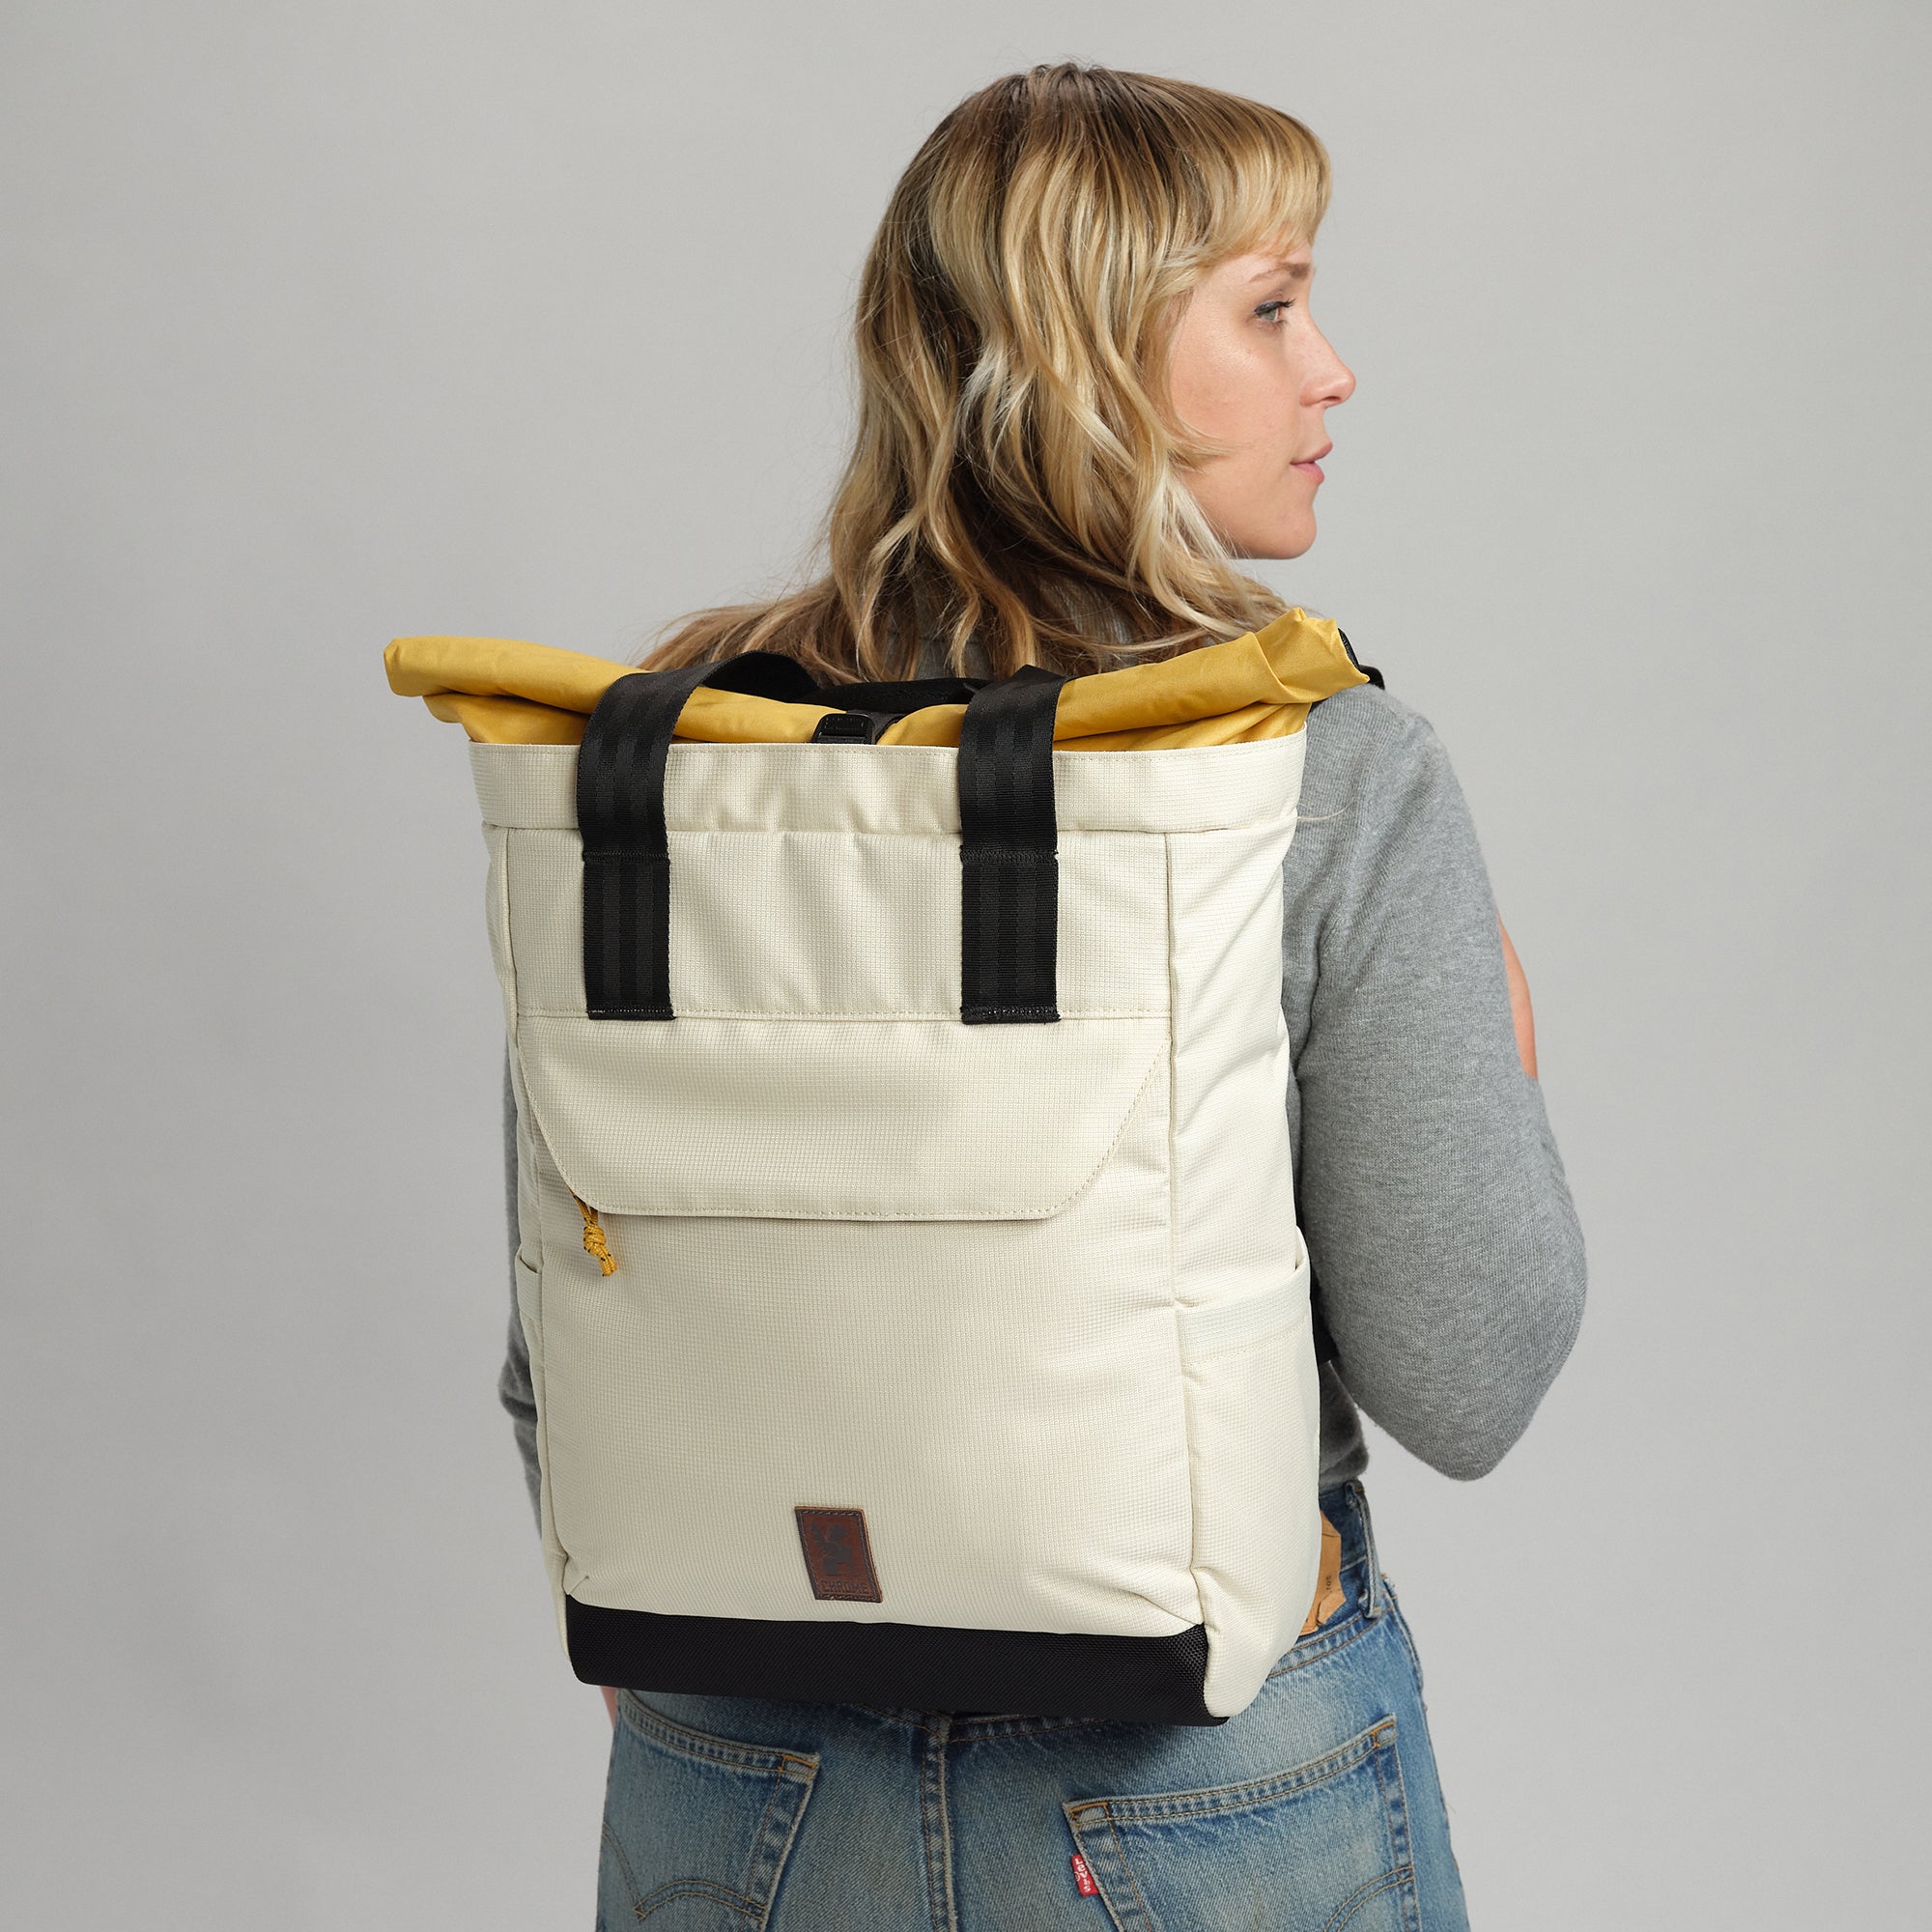 Ruckas tote in natural on a woman worn as a backpack